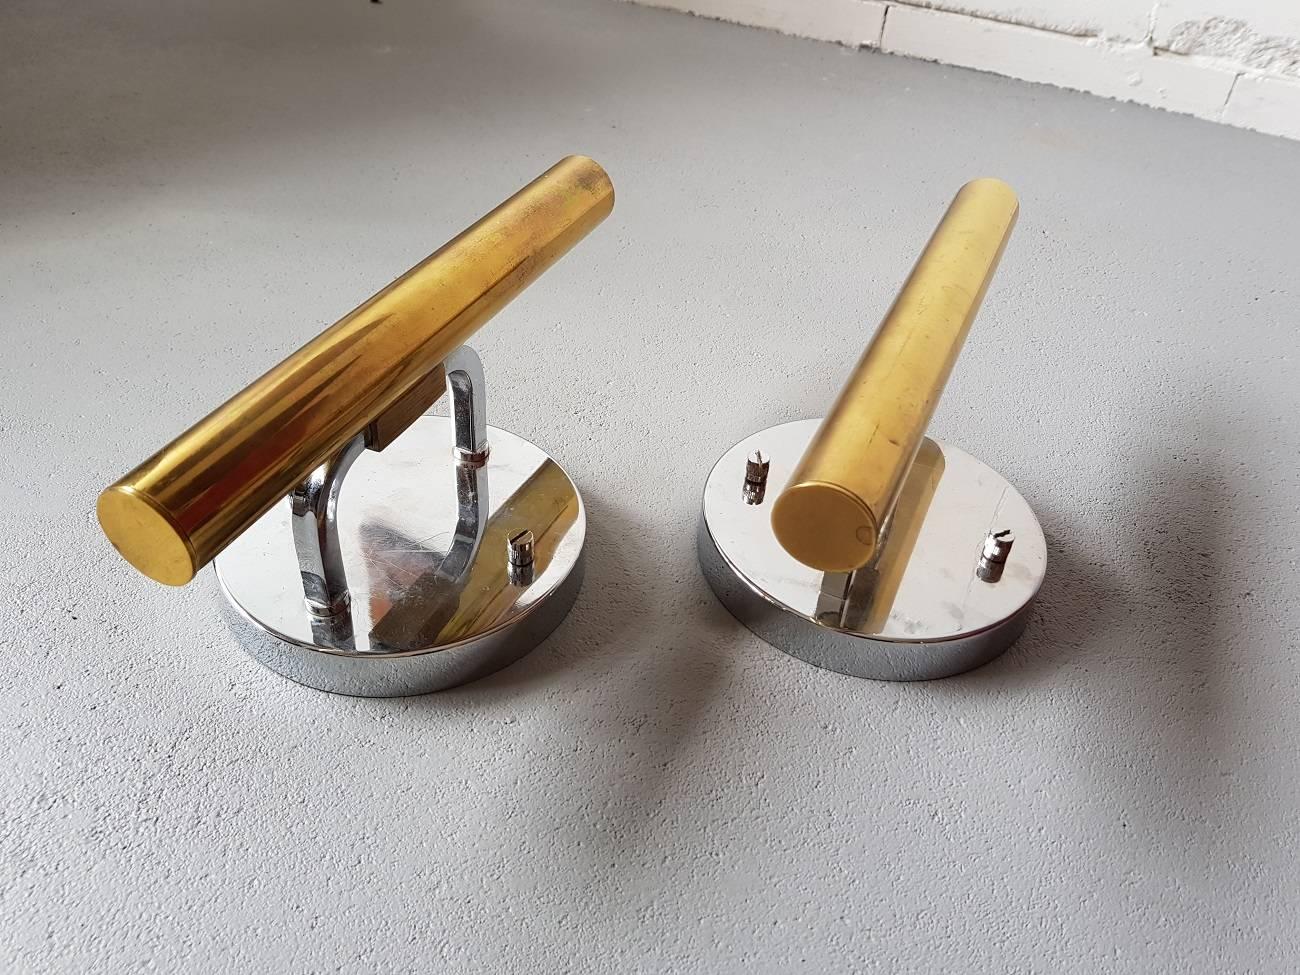 Pair of Gaetano Sciolari wall lamps of chrome and brass made in the 1960s in Liège. Both minor wear of consistent by age and use.

The measurements are,
Depth 11 cm/ 4.3 inch.
Width 13 cm/ 5.1 inch.
Height 24 cm/ 9.4 inch.
   